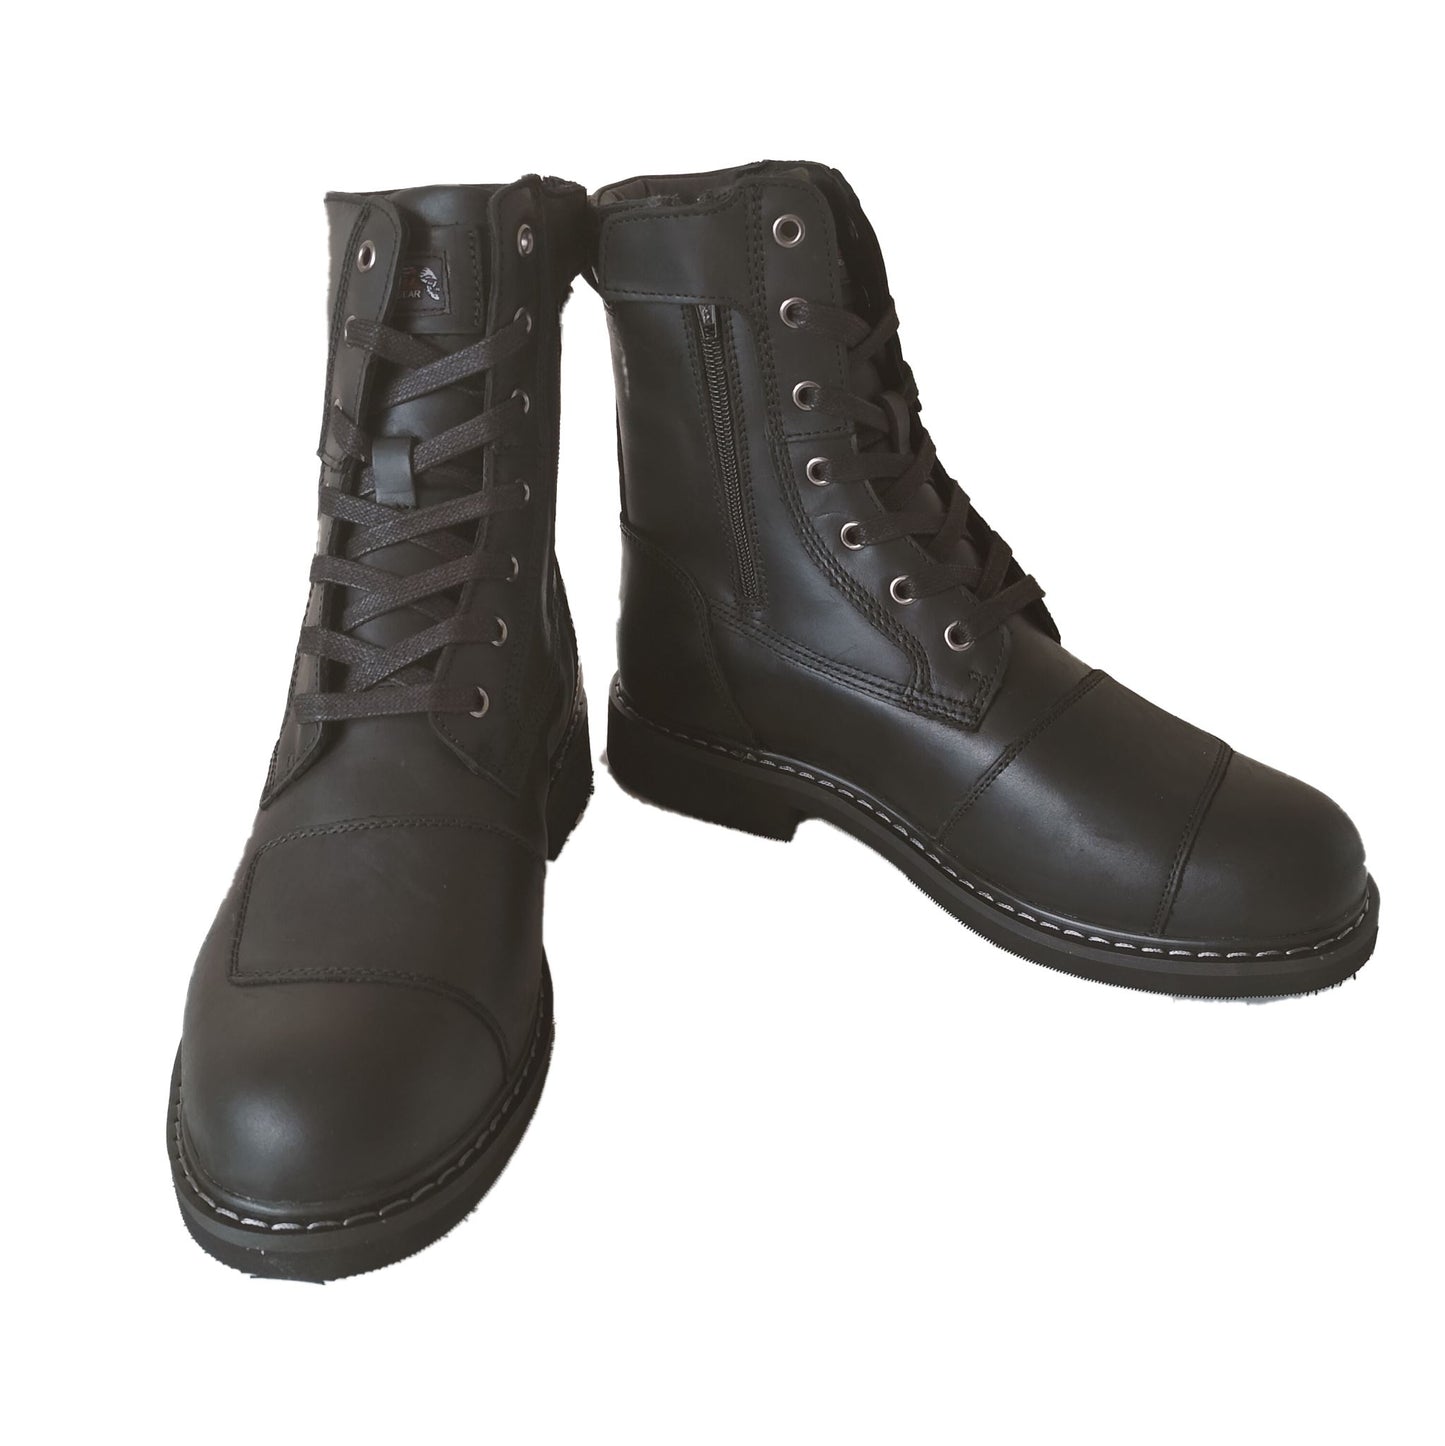 CNELL Side-Zip Motorcycle Leather Riding Boots - SM017